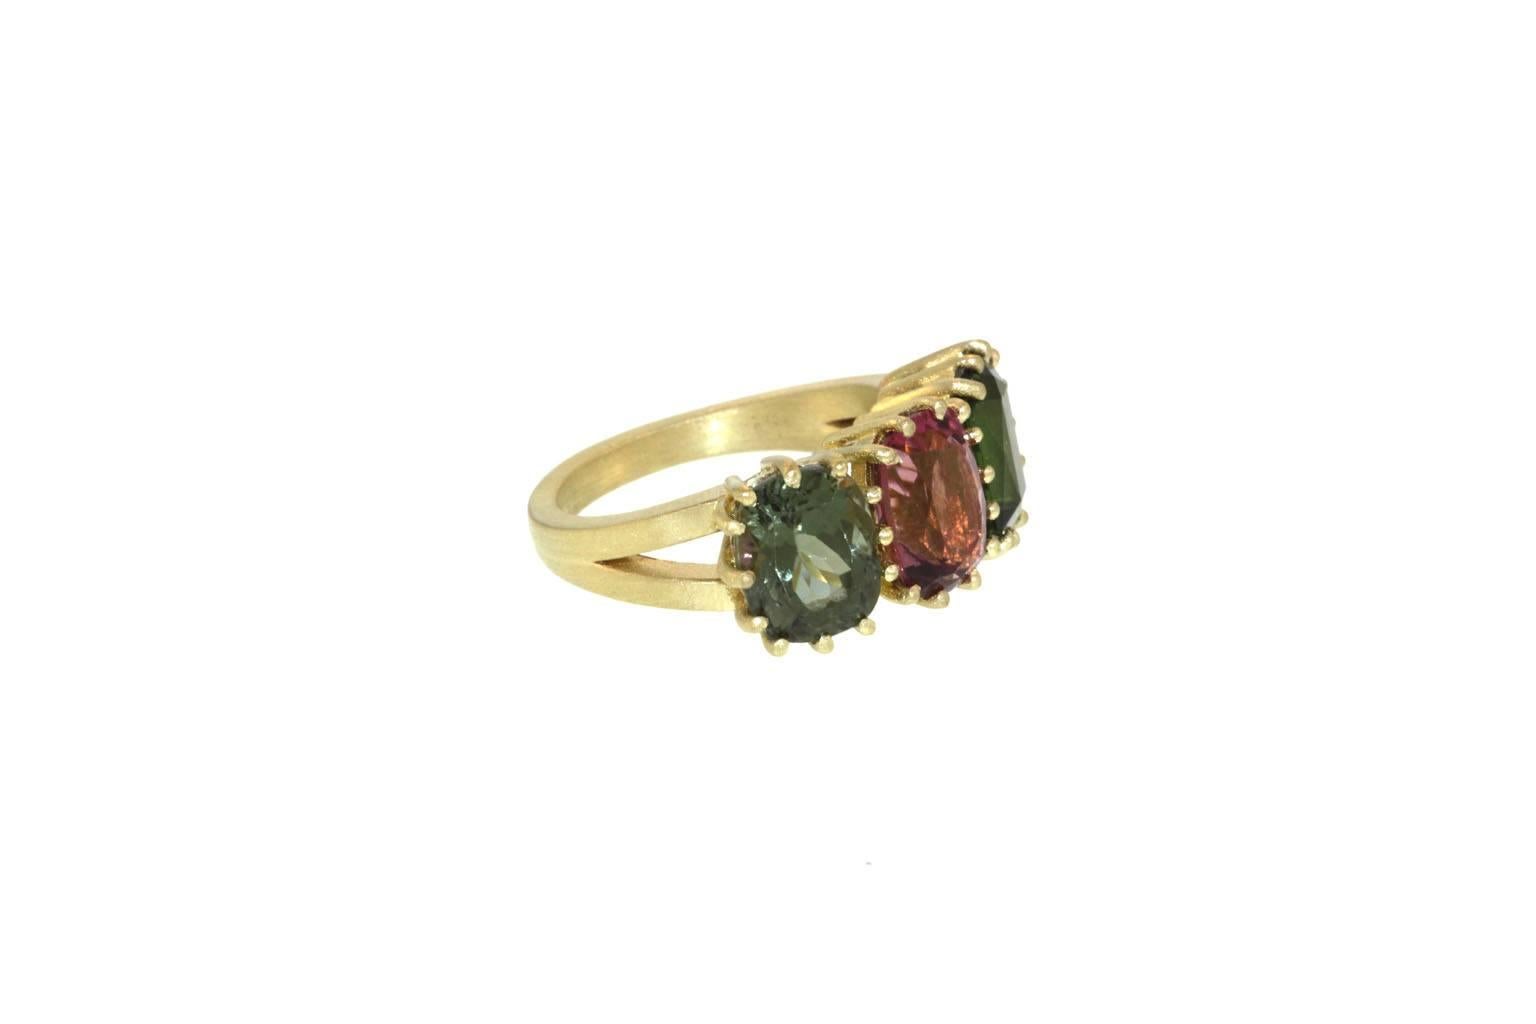 A perfect ring for fall! Three prong set tourmalines sit horizontally side by side to create a beautiful triple stone ring. Tourmalines of mixed colors, the center oval pink tourmaline rests in-between an oval teal tourmaline and a square green